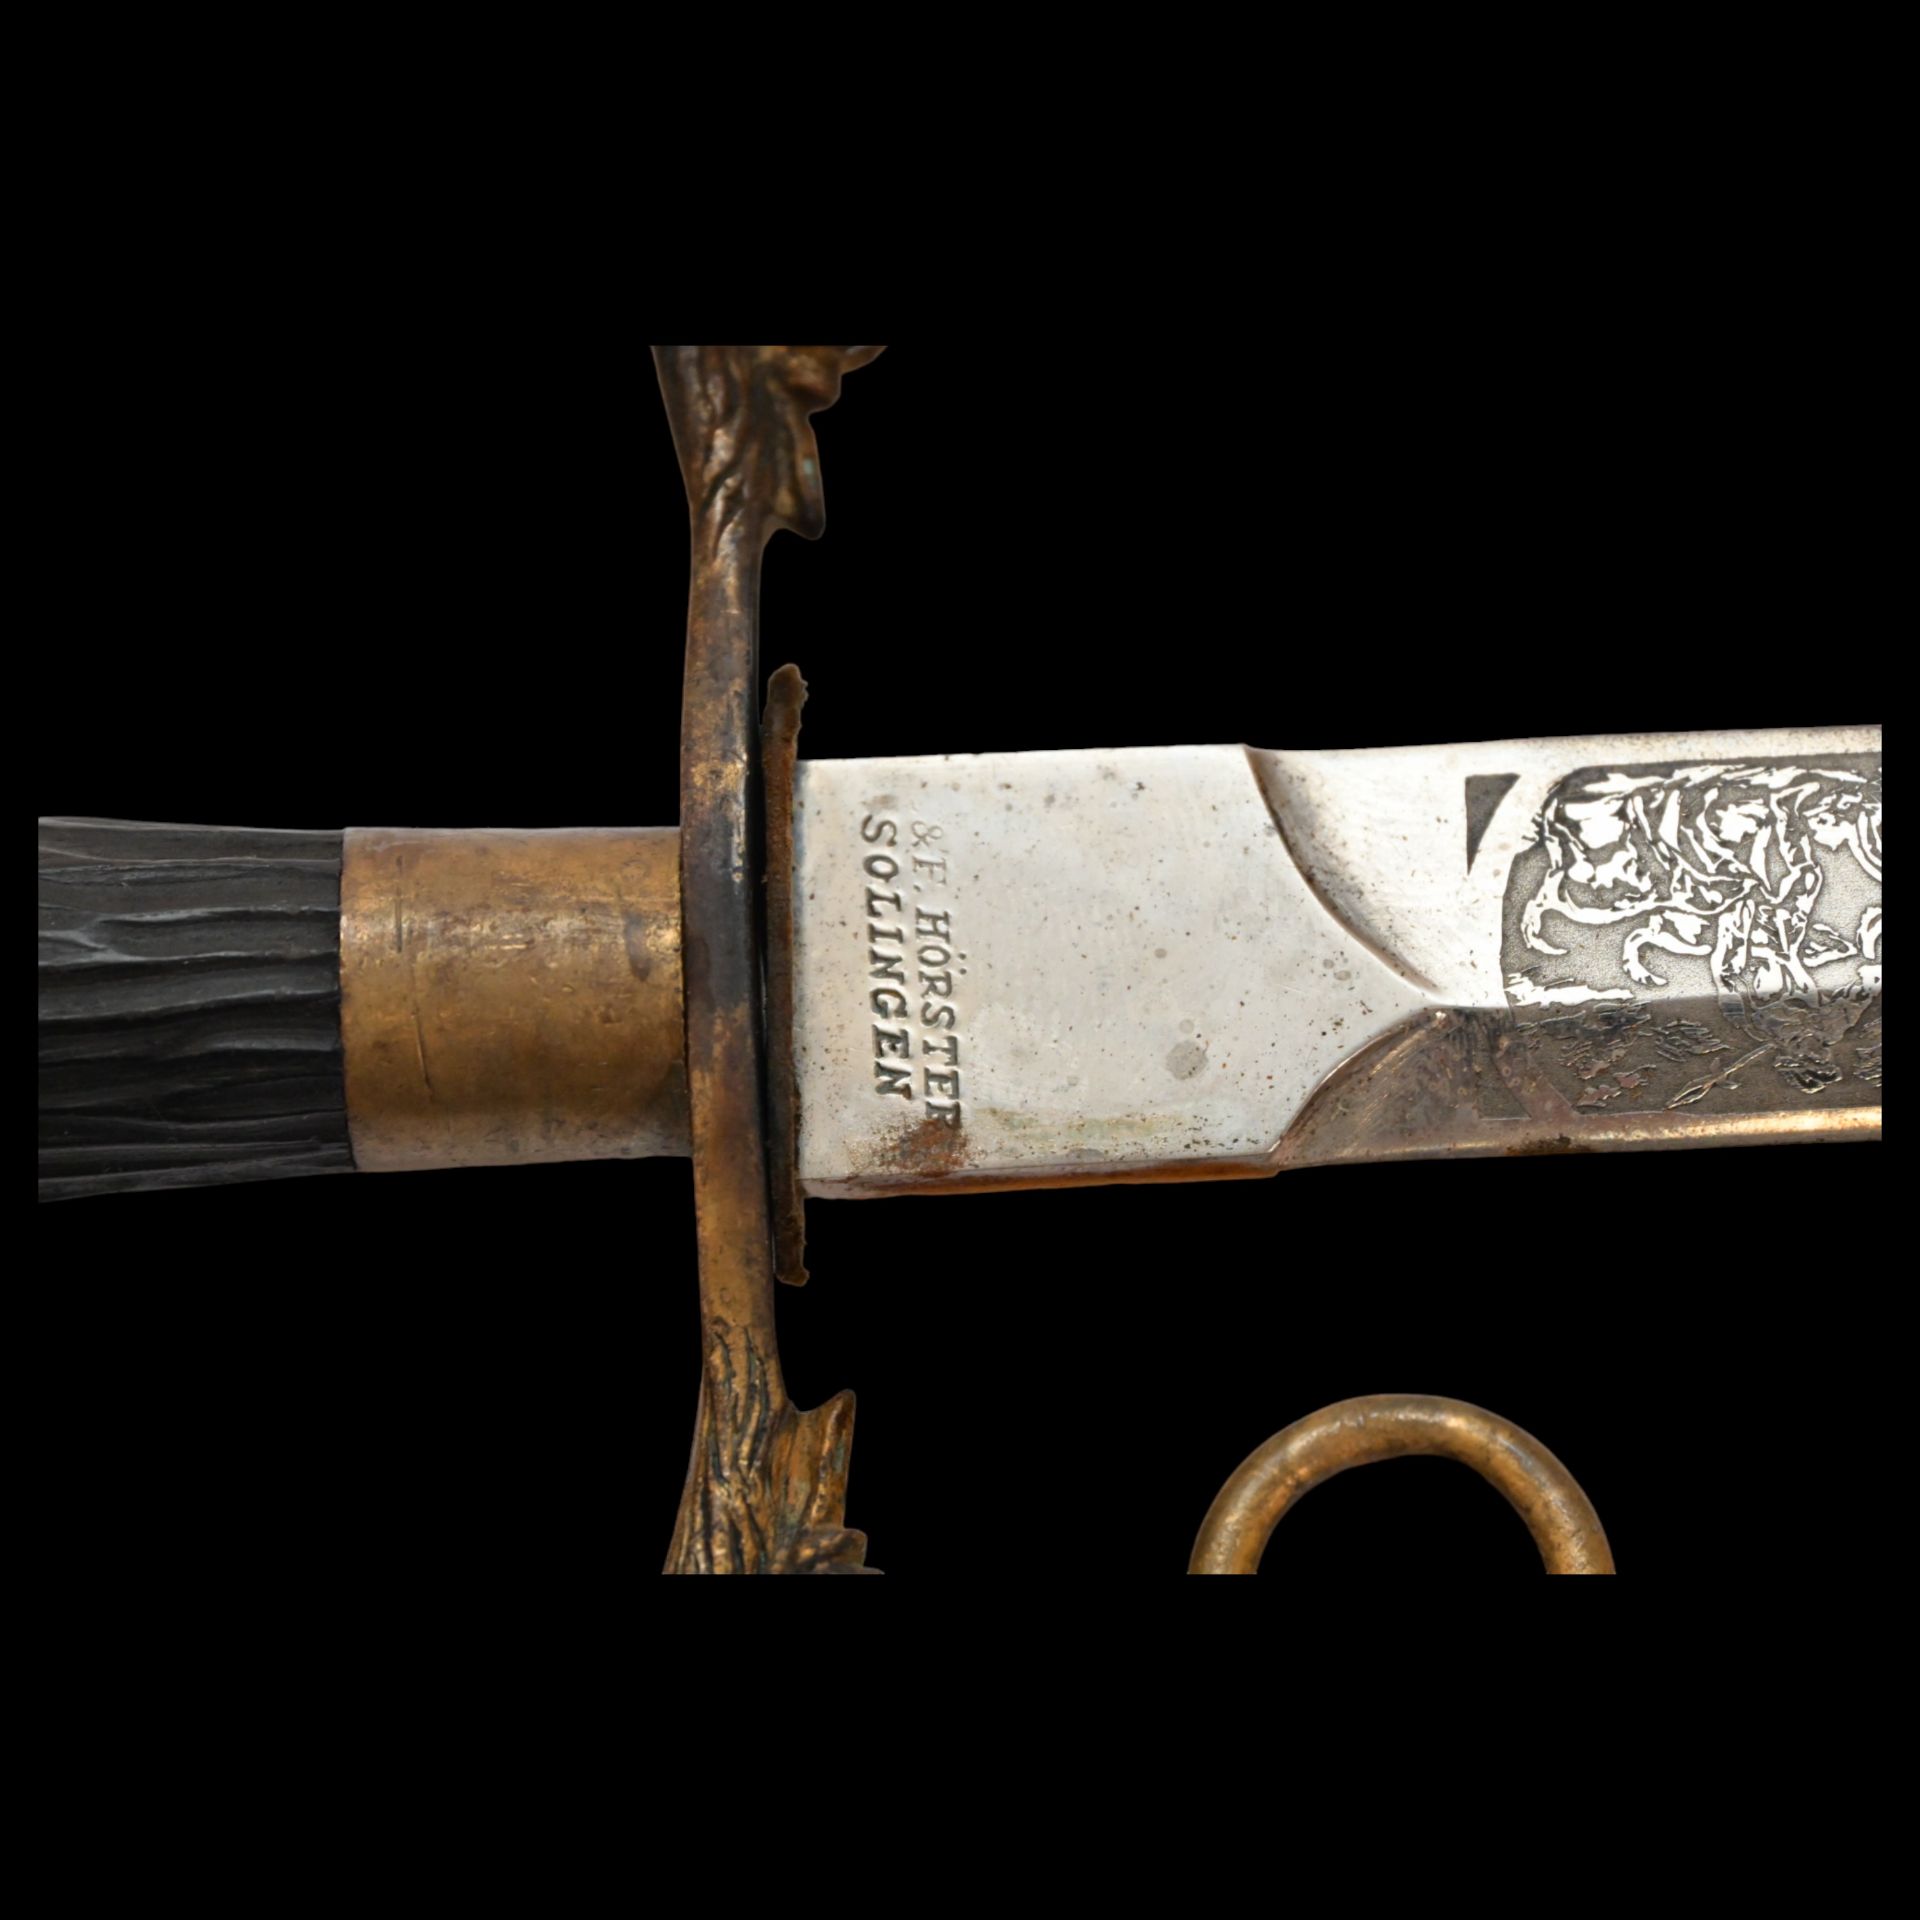 Knife of the class ranks of the Forester Corps, model 1898, Russian Empire, early 20th century. - Image 4 of 8